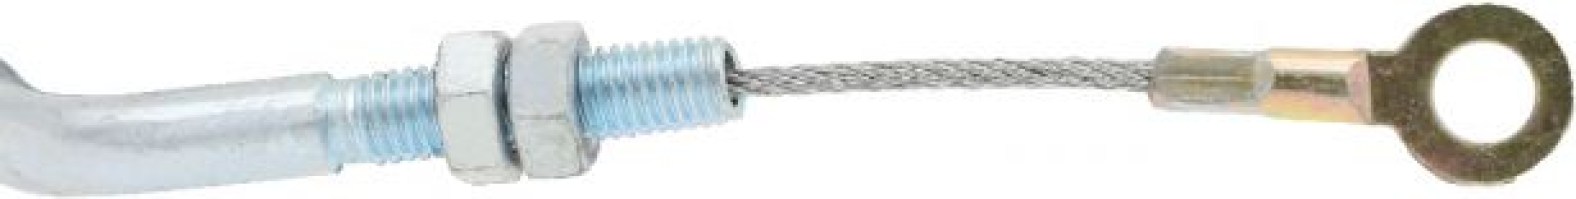 Brake_Cable_ _Bent_Connector_M8_150 5cm_Total_Length__3